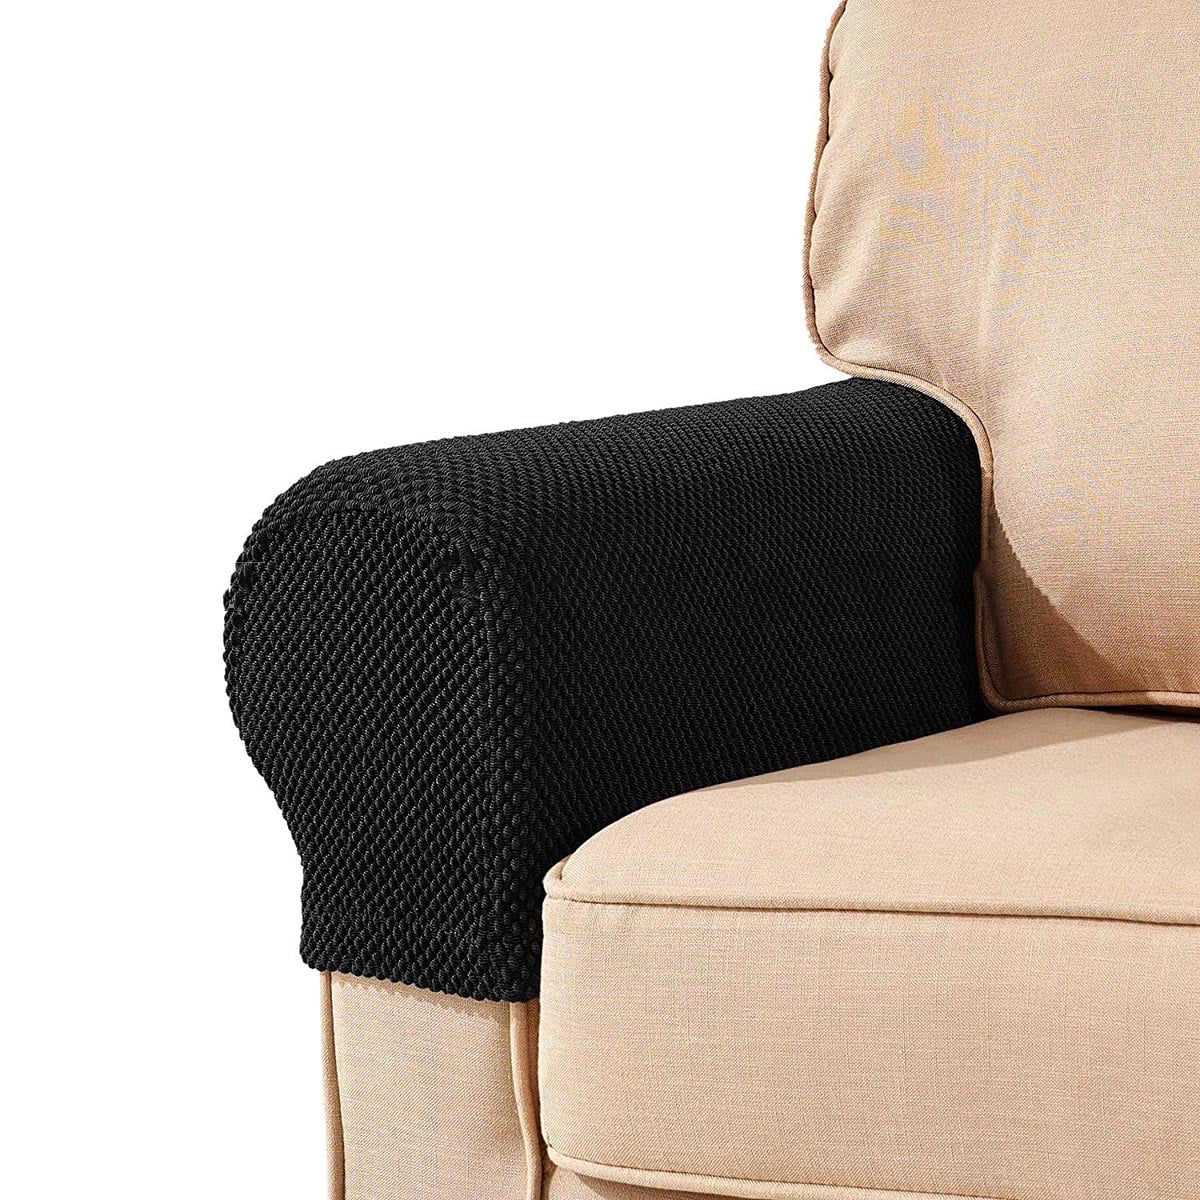 Velvet Stretch Armrest Covers Set Of 2 Soft Sofa Armrest Covers Non Slip Removable Arm Covers Furniture Protector Covers For Chairs Couch Sofa Washable-brown